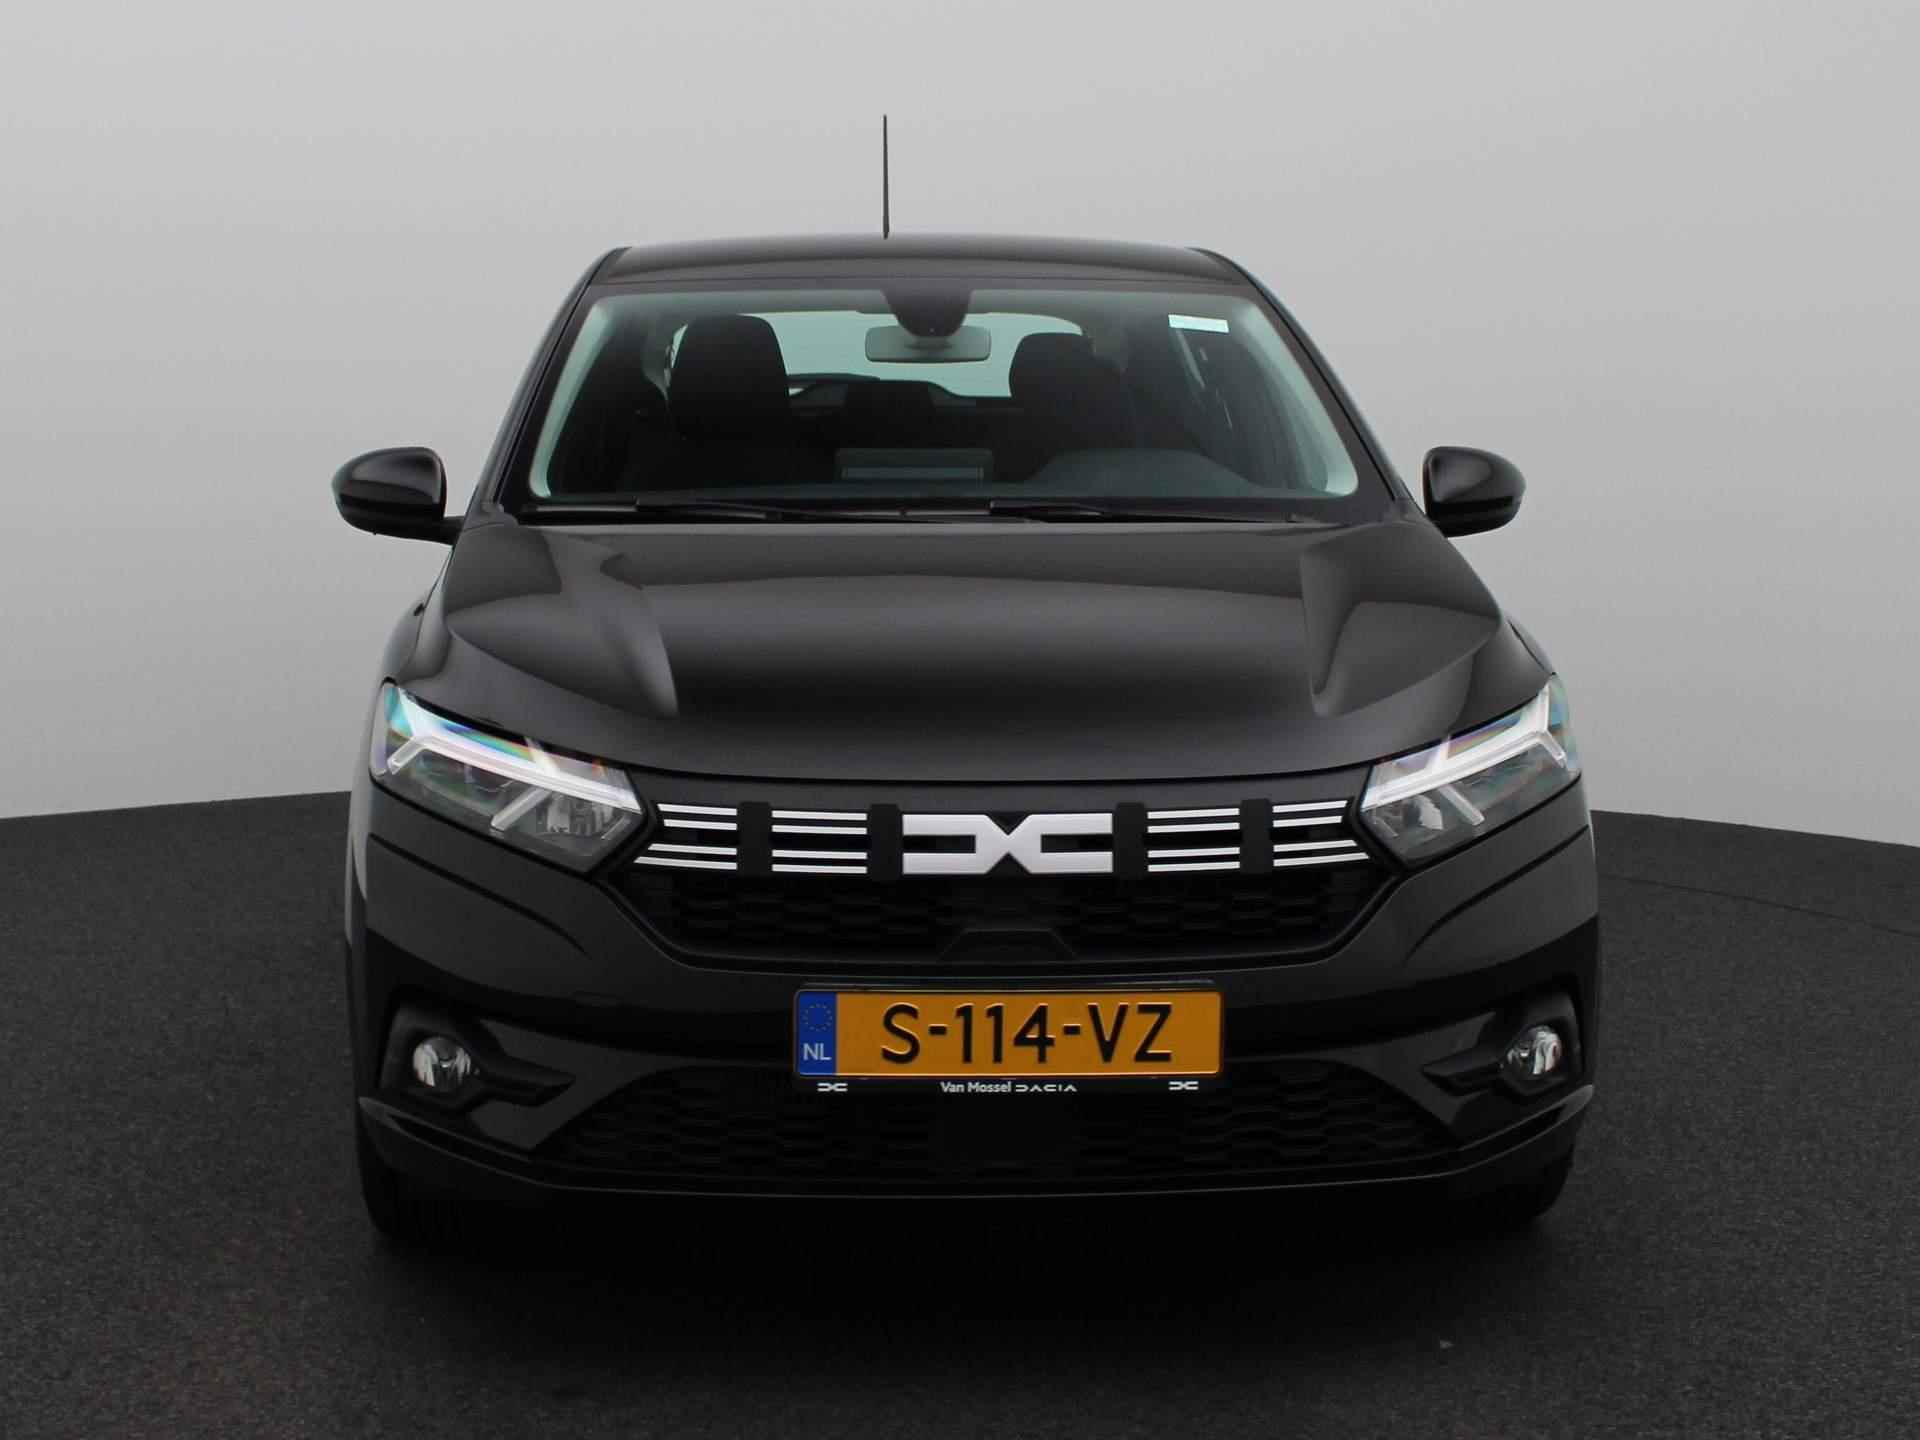 Dacia Sandero 1.0 TCe 90 Expression | Pack MediaNav | PDC Achter | LED-verlichting | Licht- en regensensor | Airconditioning | Apple Carplay & Android Auto - 3/34